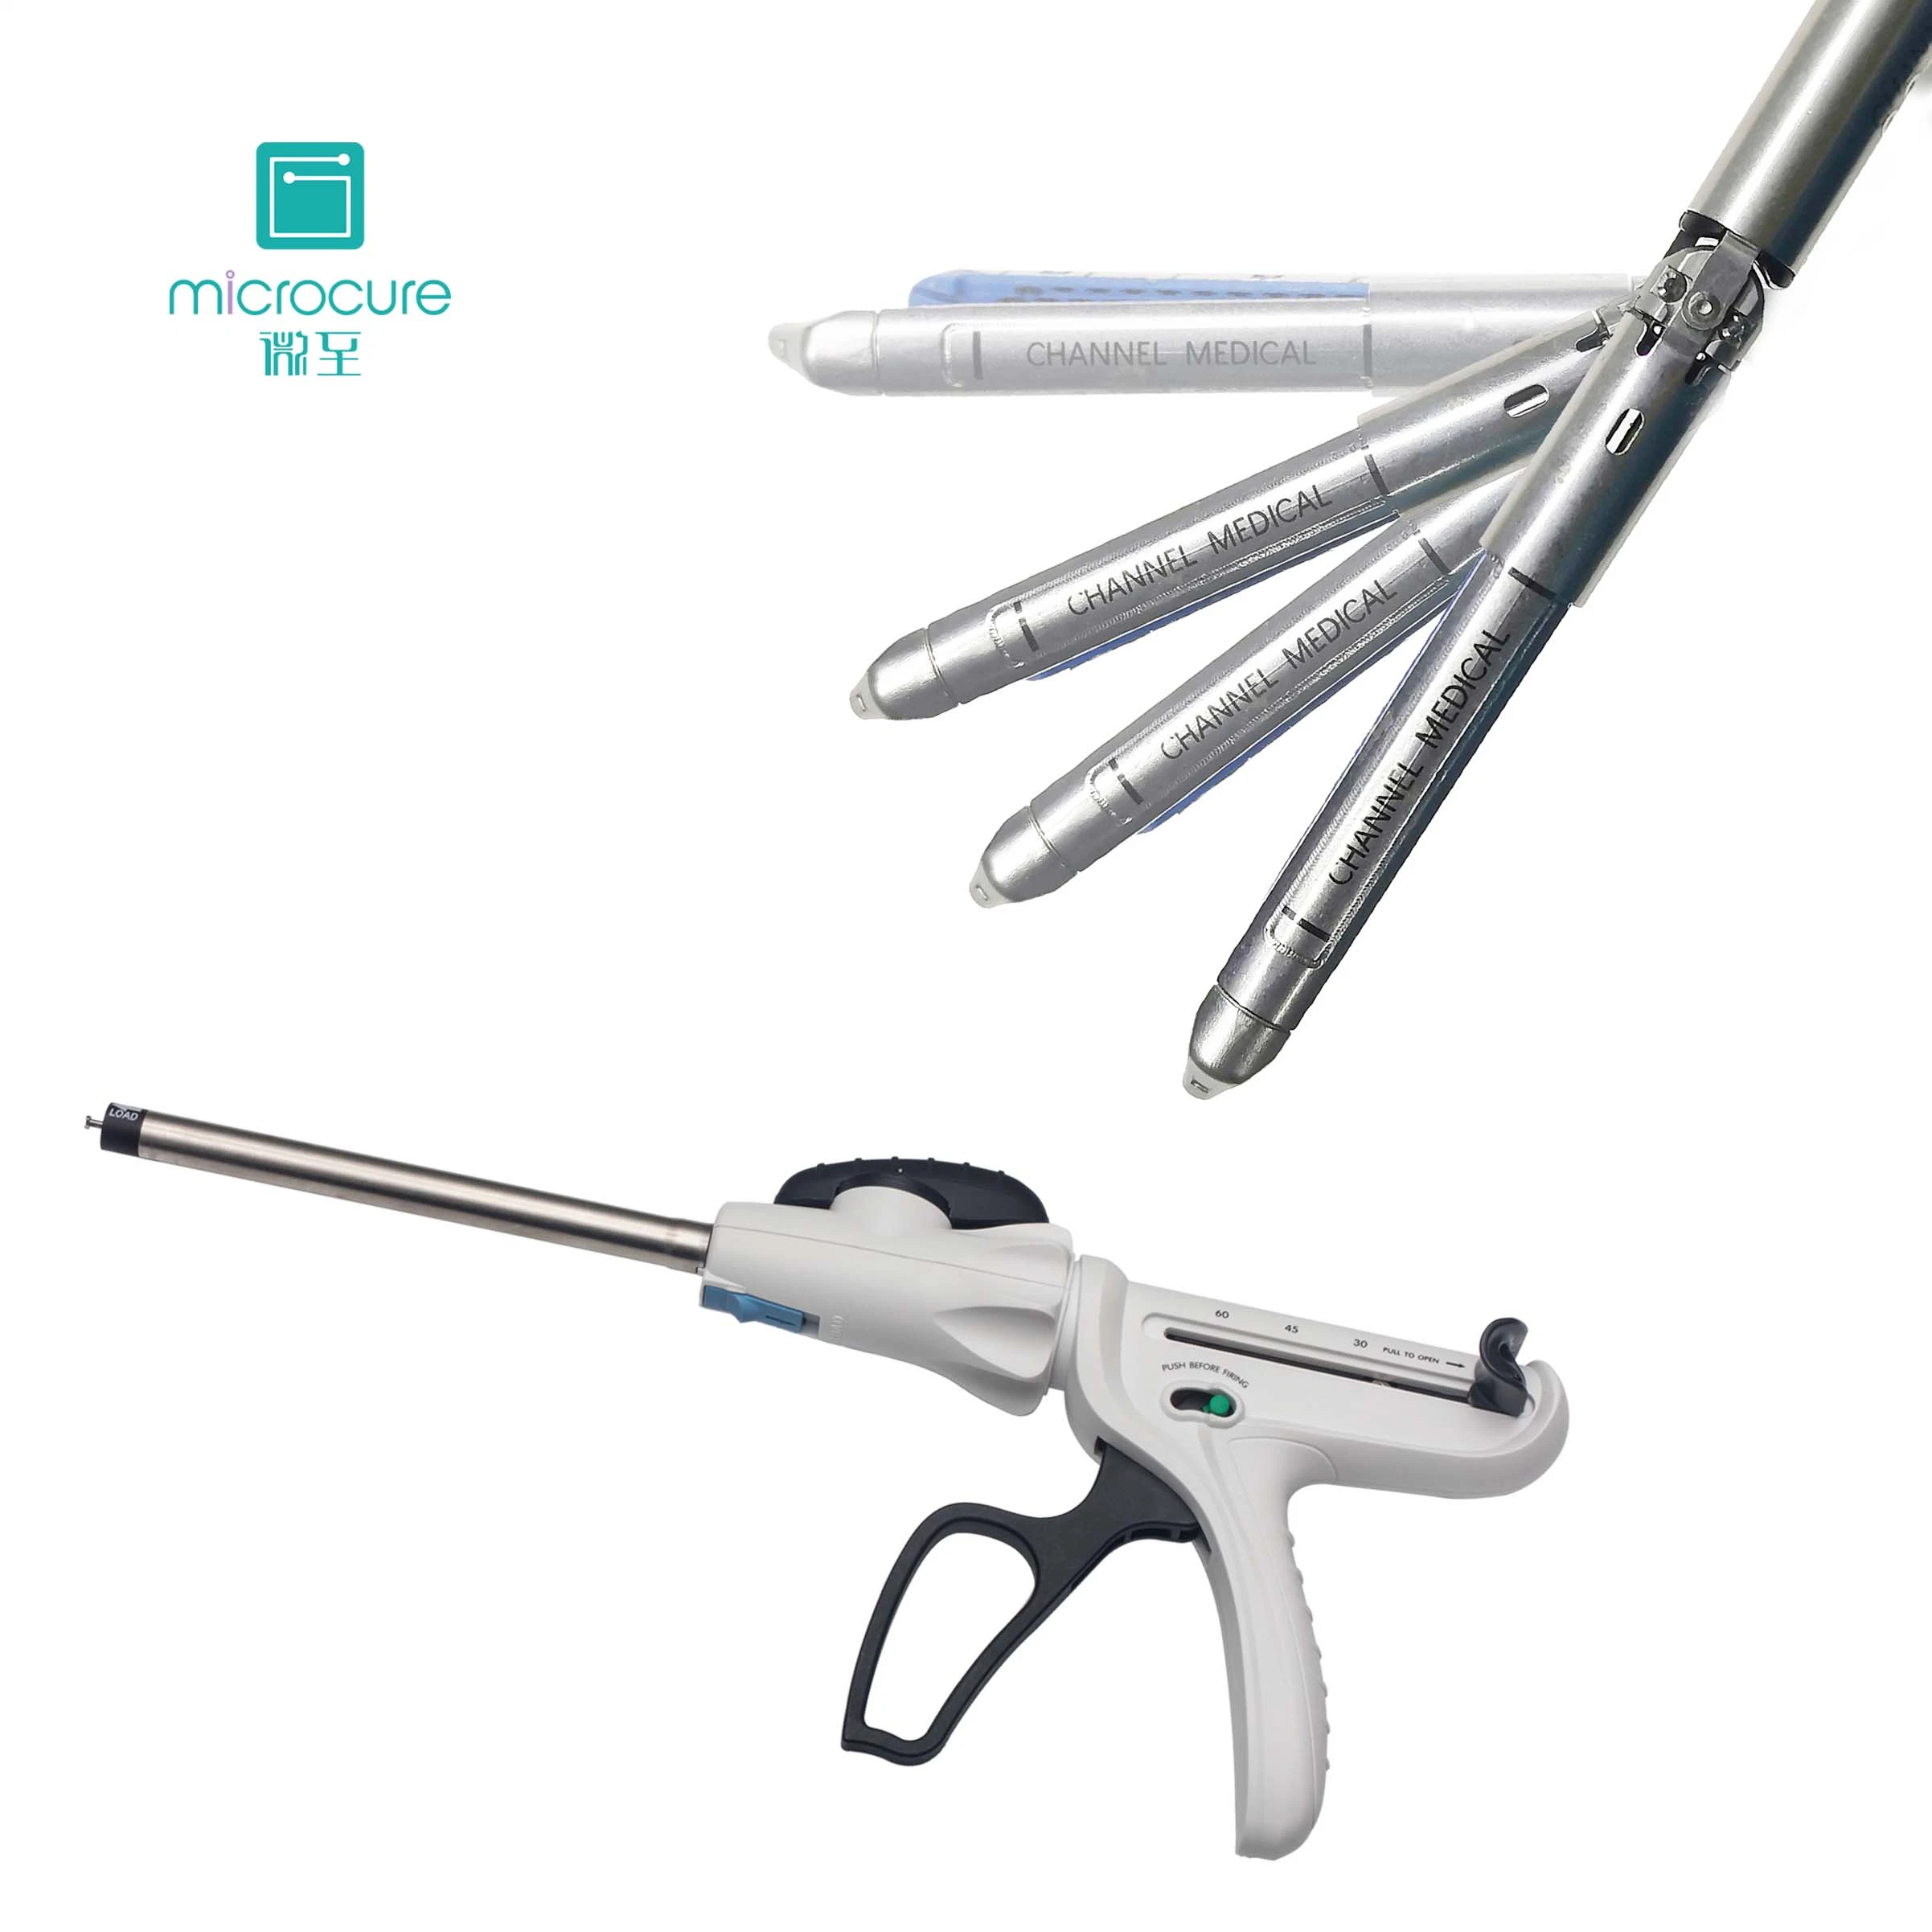 Disposable Surgical Instrument Laparoscopic Product Endoscopic Linear Cutter Stapler